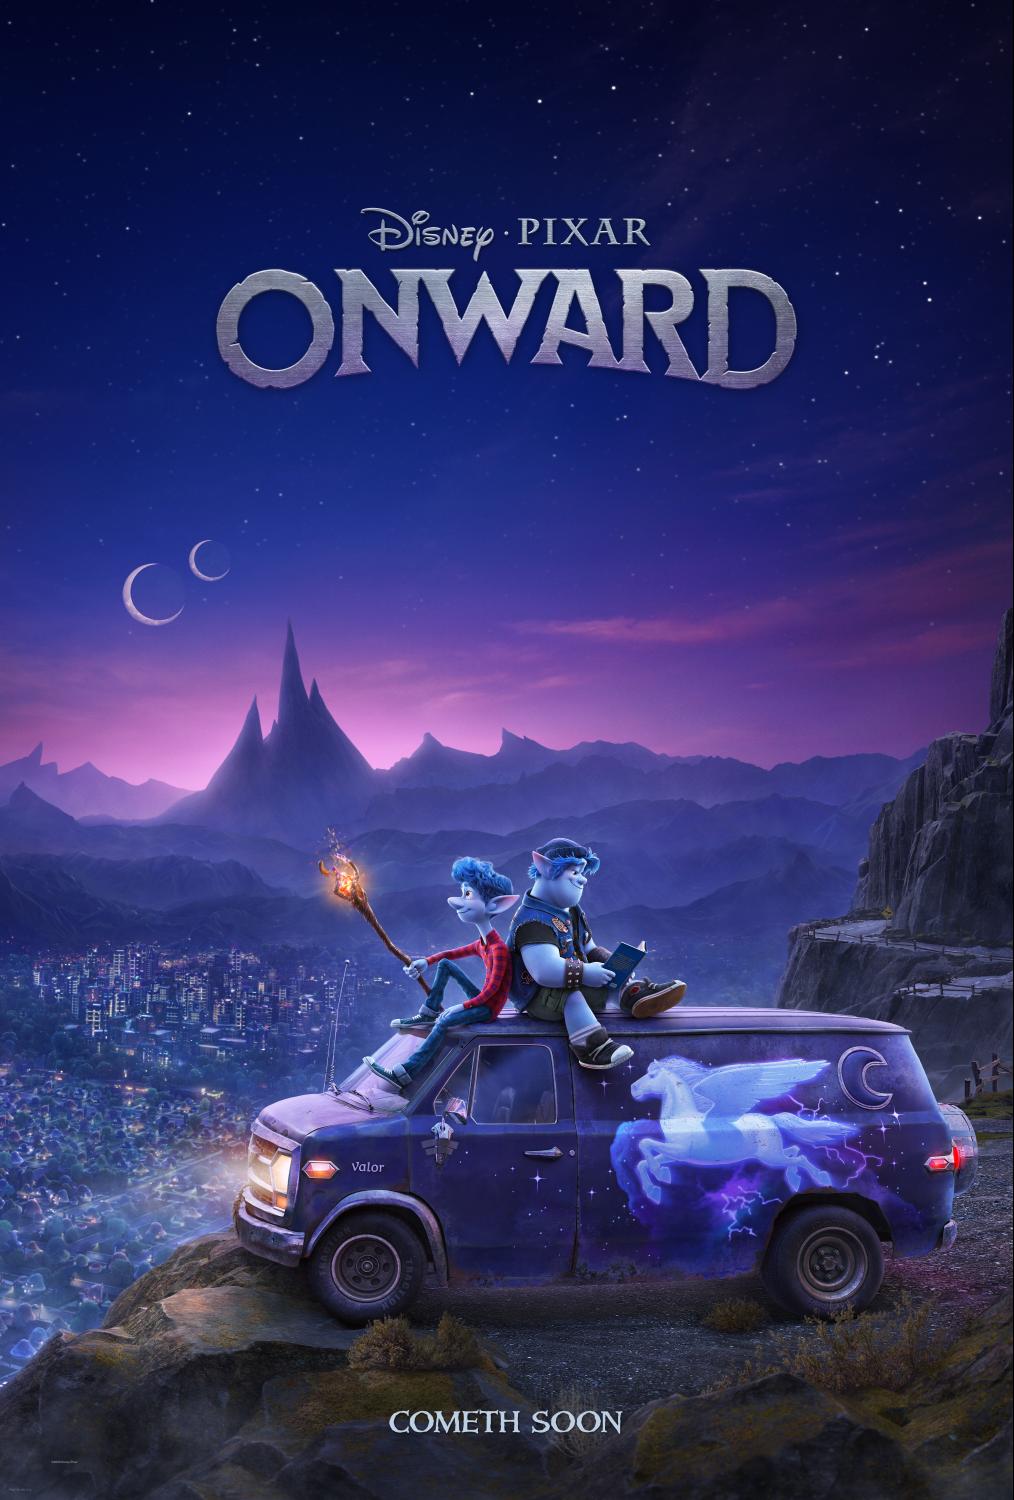 Teaser Trailer and Poster from Onward